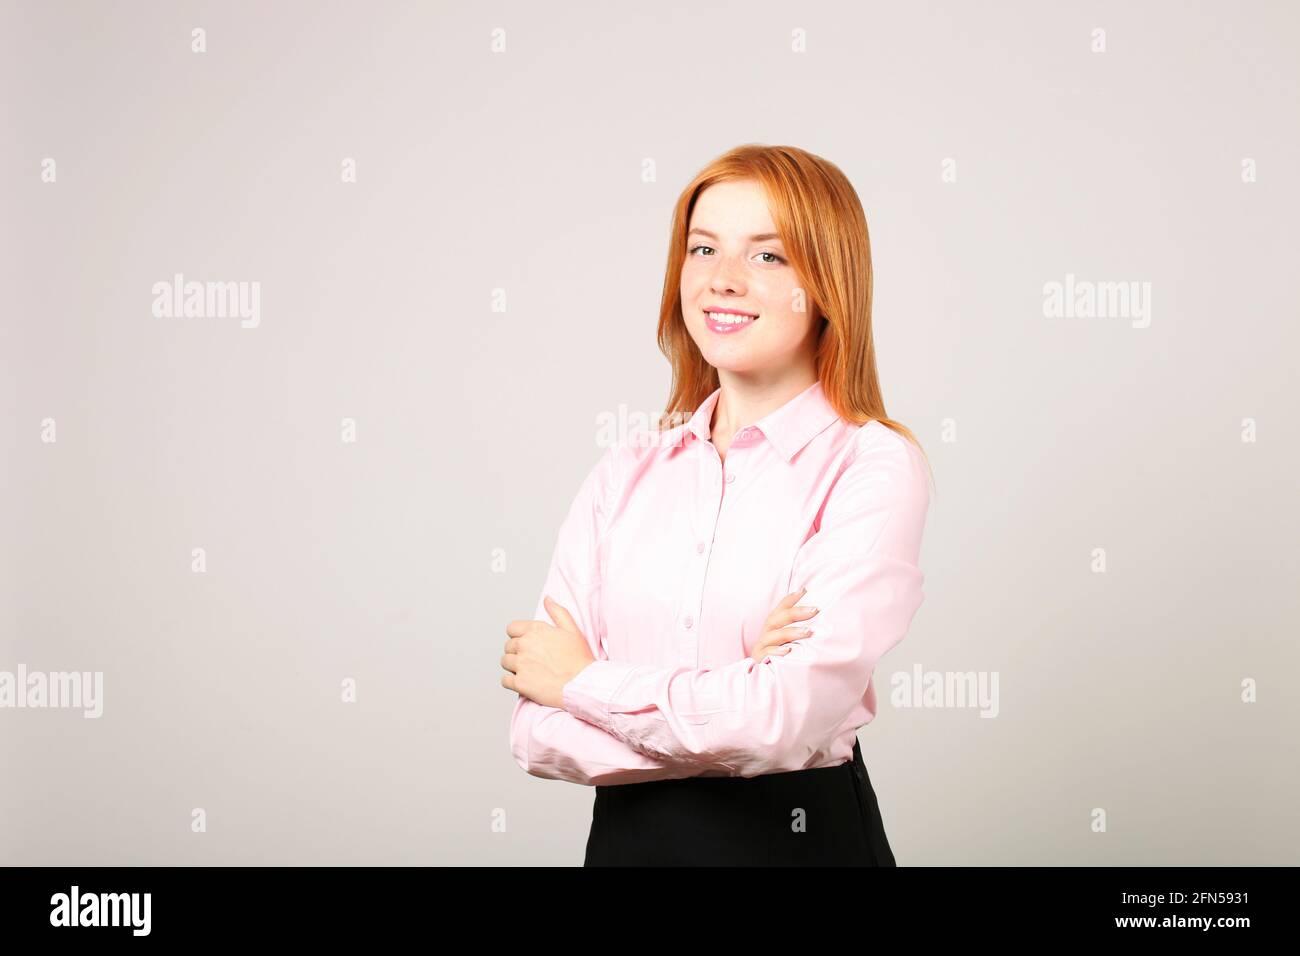 Beautiful businesswoman wearing formal wear, black skirt & pink blouse standing with arms folded on chest. Attractive woman w/ red hair & light make u Stock Photo